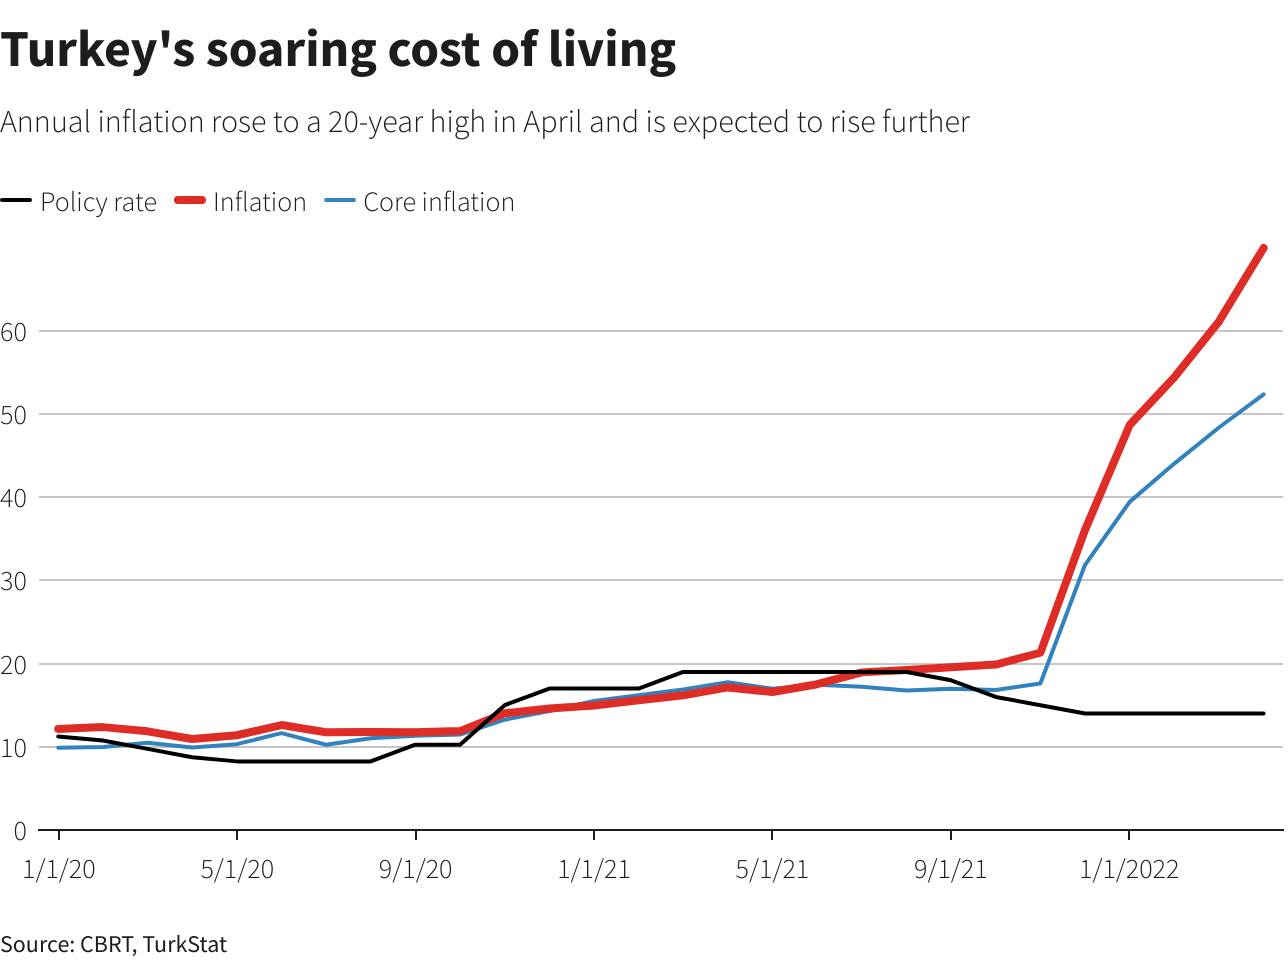 Turkey's soaring cost of living graphics.